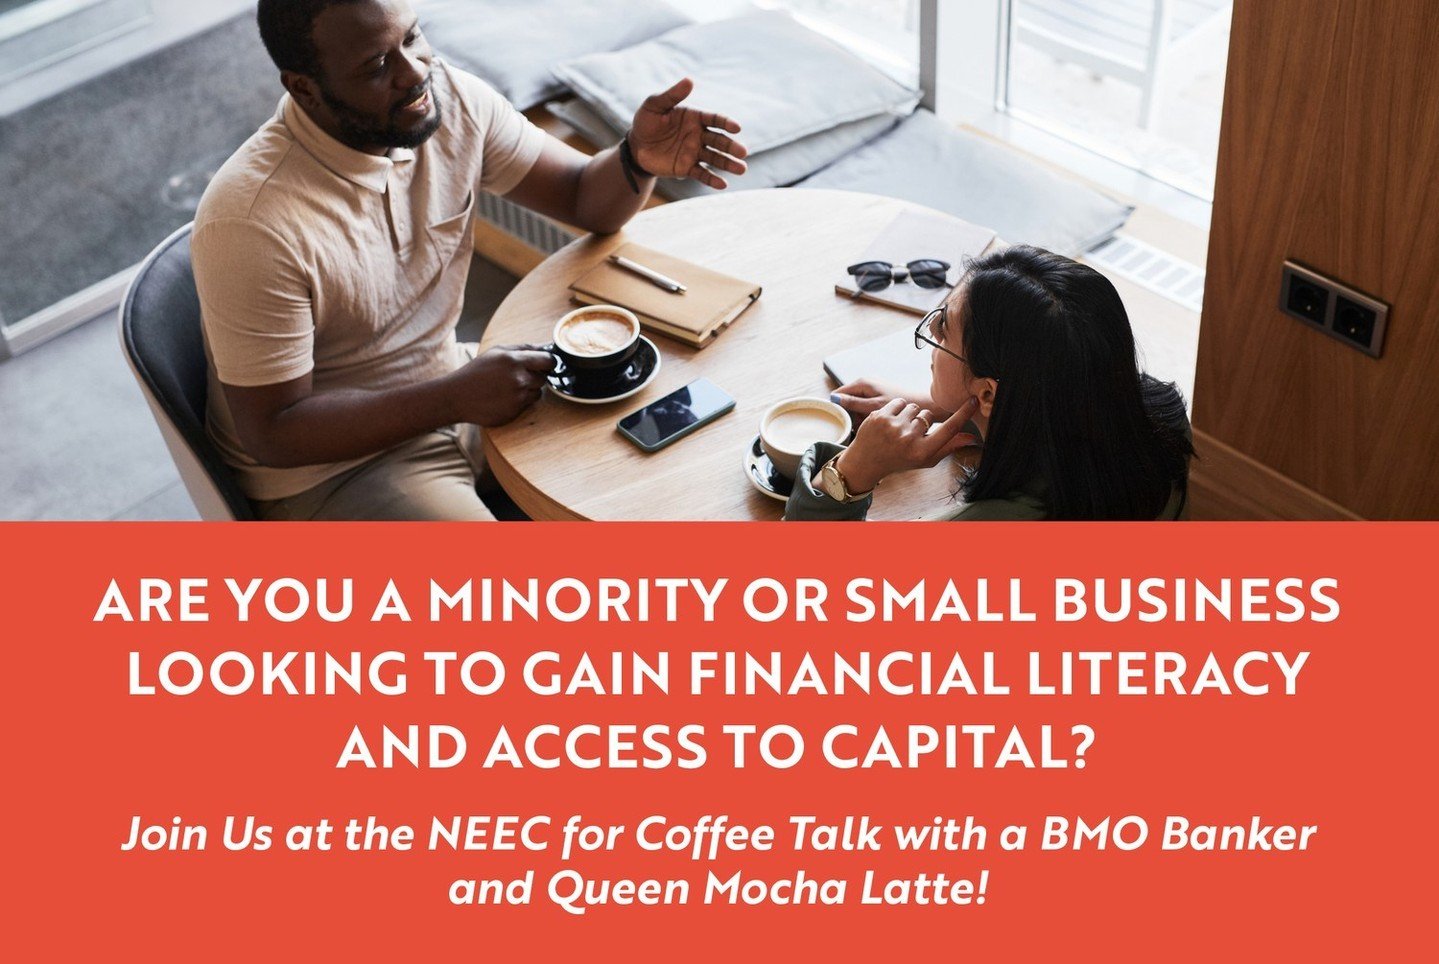 Hey minority &amp; small businesses: Gain financial literacy &amp; access to capital during BMO&rsquo;s Coffee Talk on 4/19 at the #NEEC. This unique opportunity is in partnership with local event promoter, Queen Mocha Latte. 

Learn more: https://ow